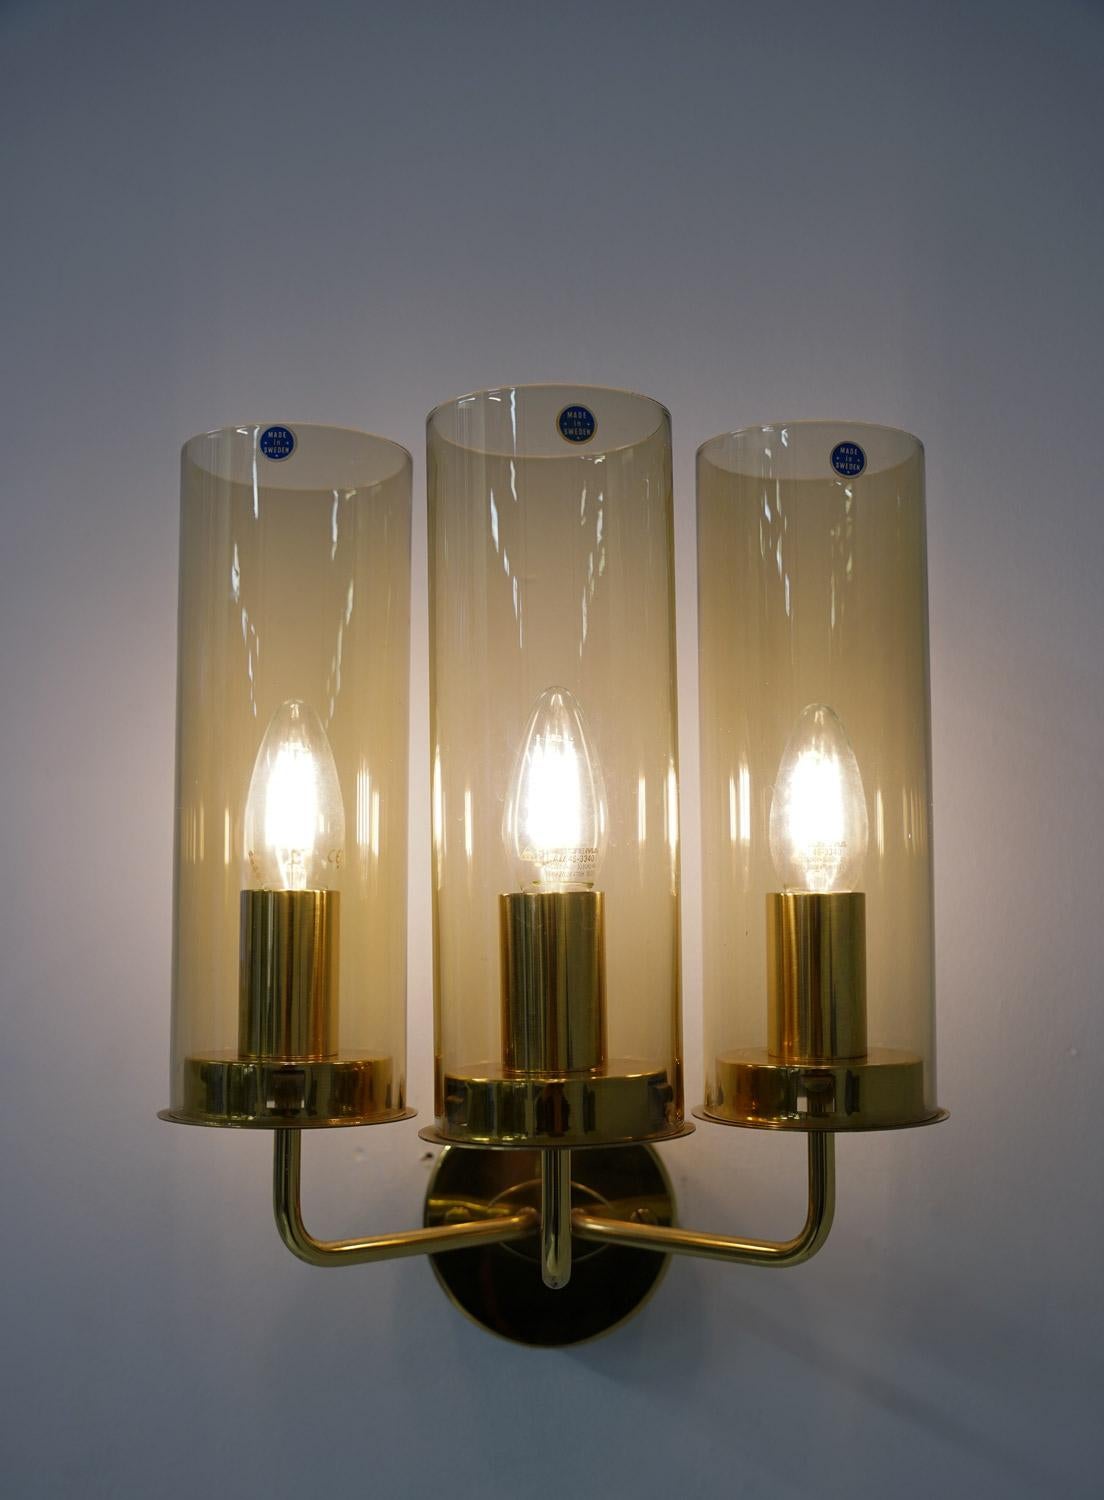 Swedish Midcentury Wall Lamps in Brass and Glass by Hans-Agne Jakobsson For Sale 1